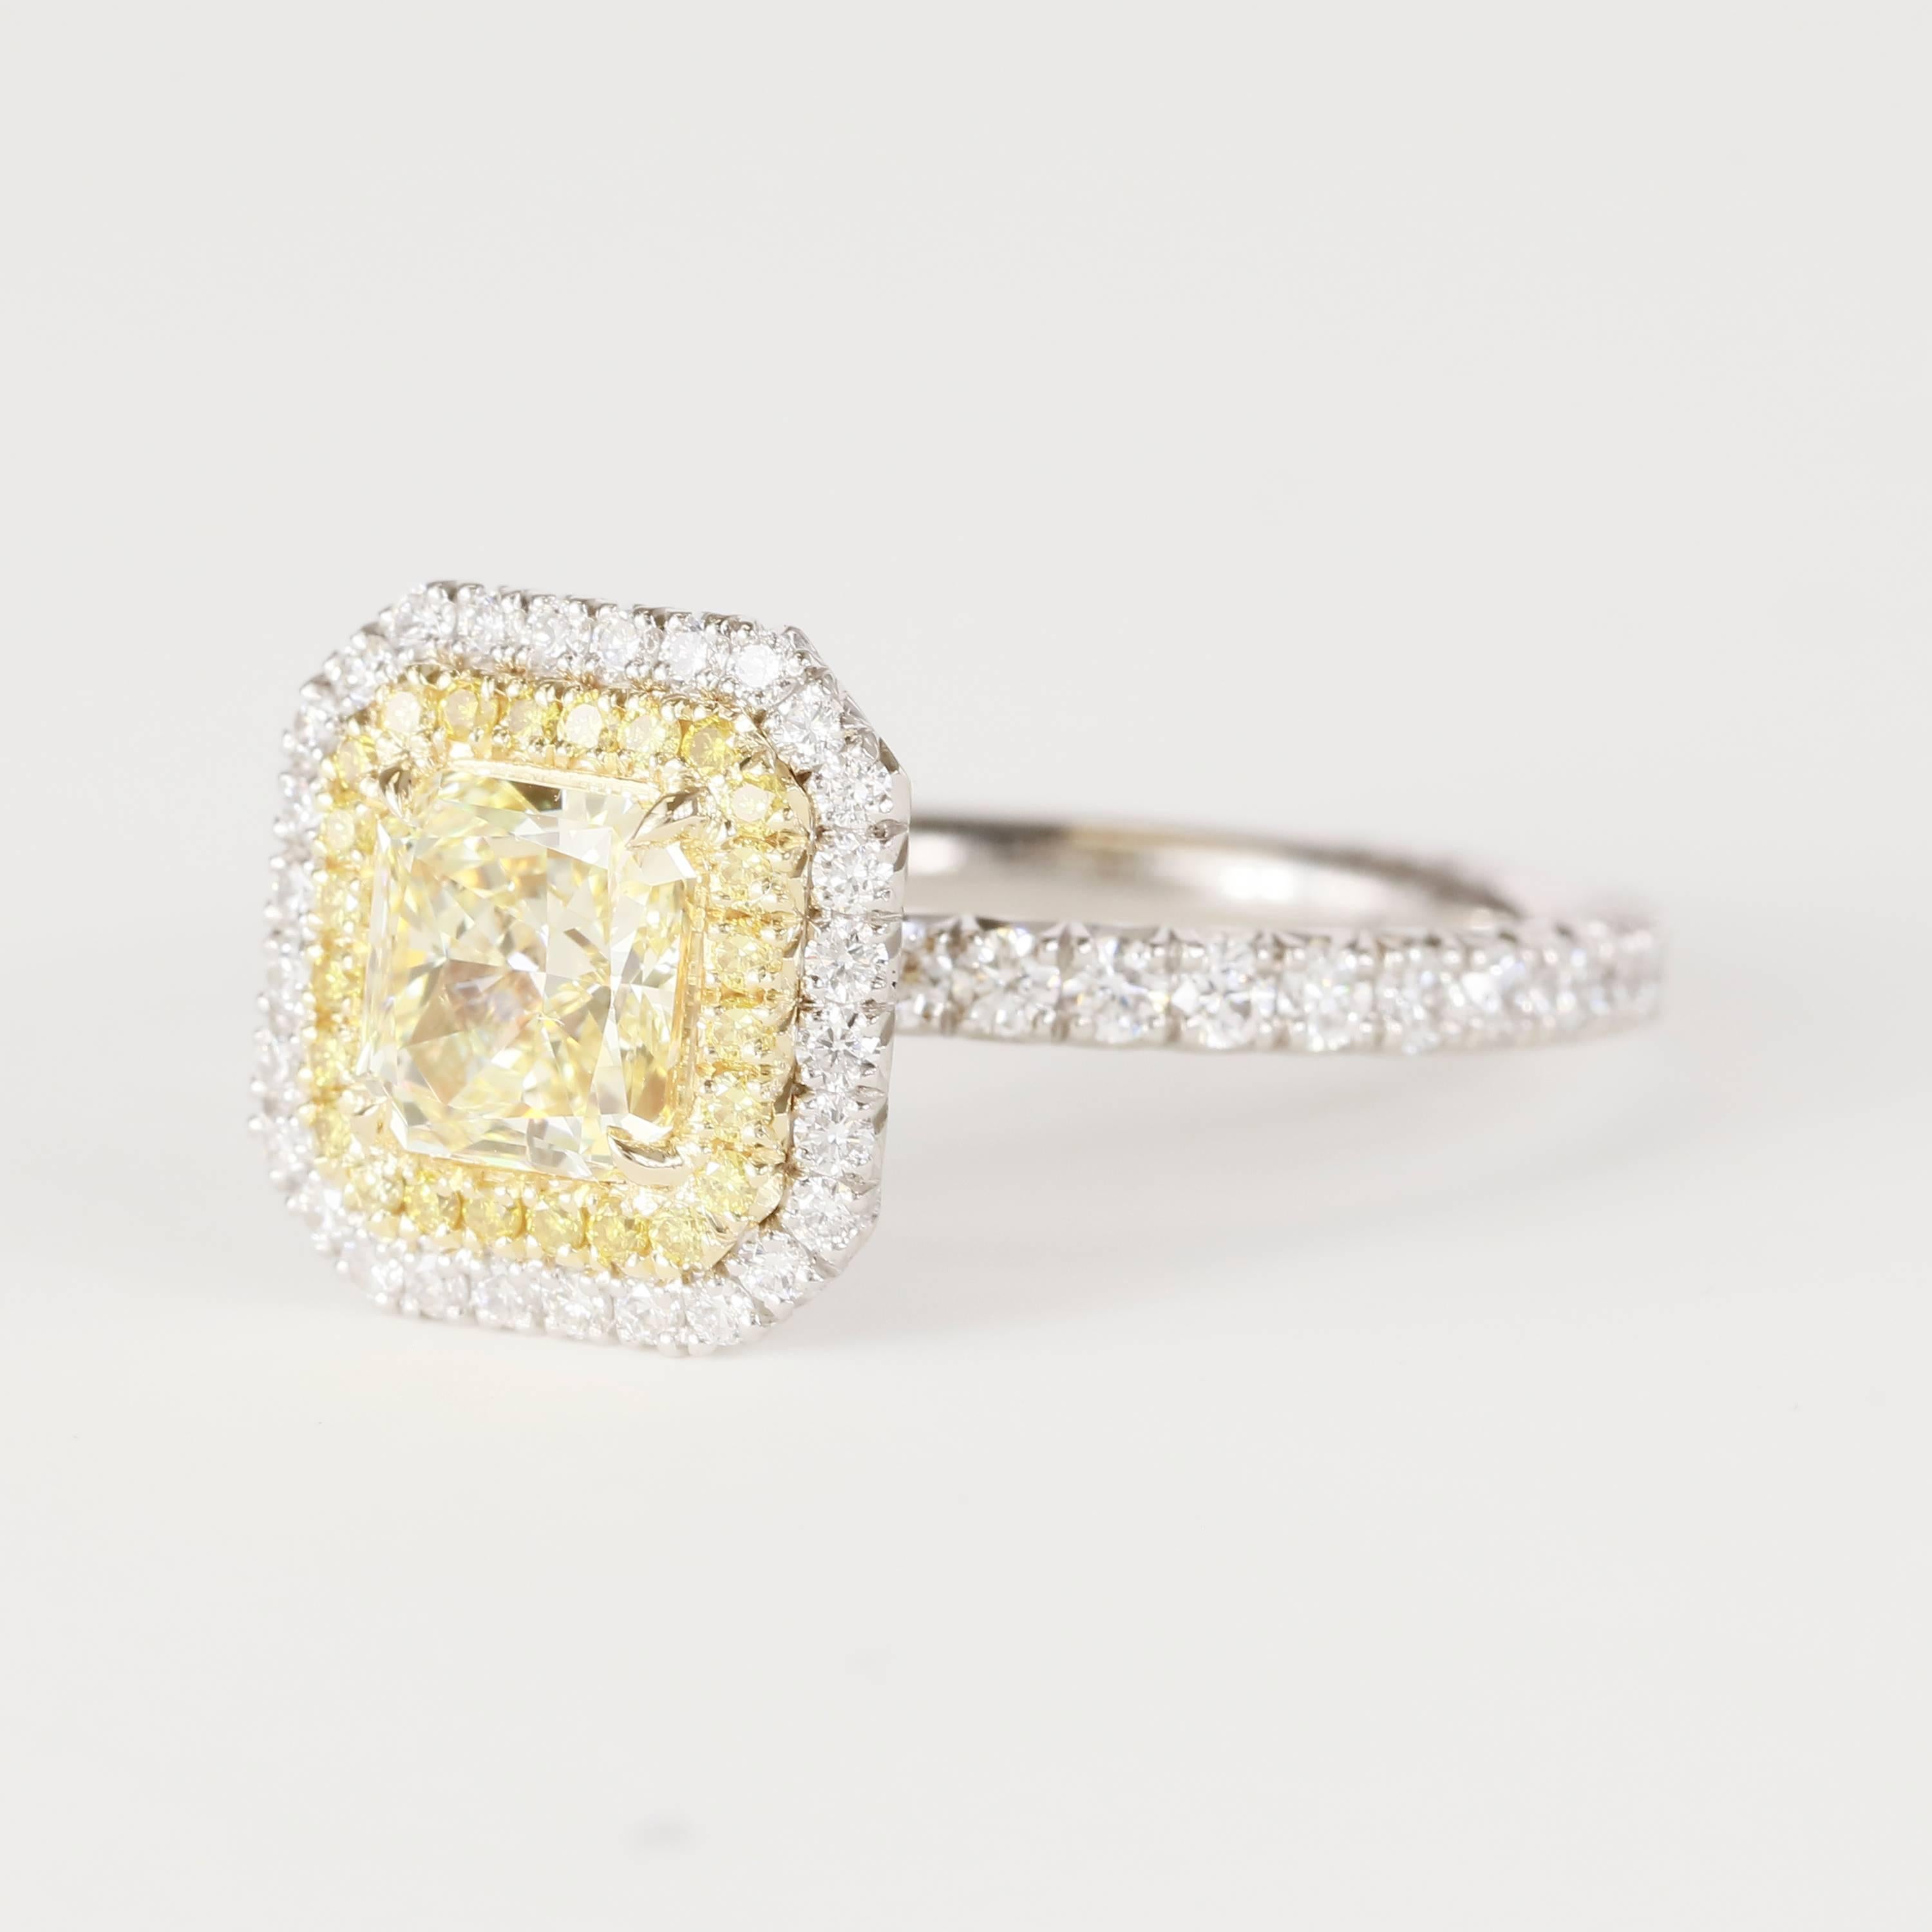 Center stone is a 1.11 carat fancy yellow VVS2 GIA Radiant Diamond
Set in Platinum and 18k yellow gold with a double halo of diamonds
The first halo has fancy yellow melee, 0.18 tw (40 stones)
The second halo (and band) has white diamonds, 0.72 tw